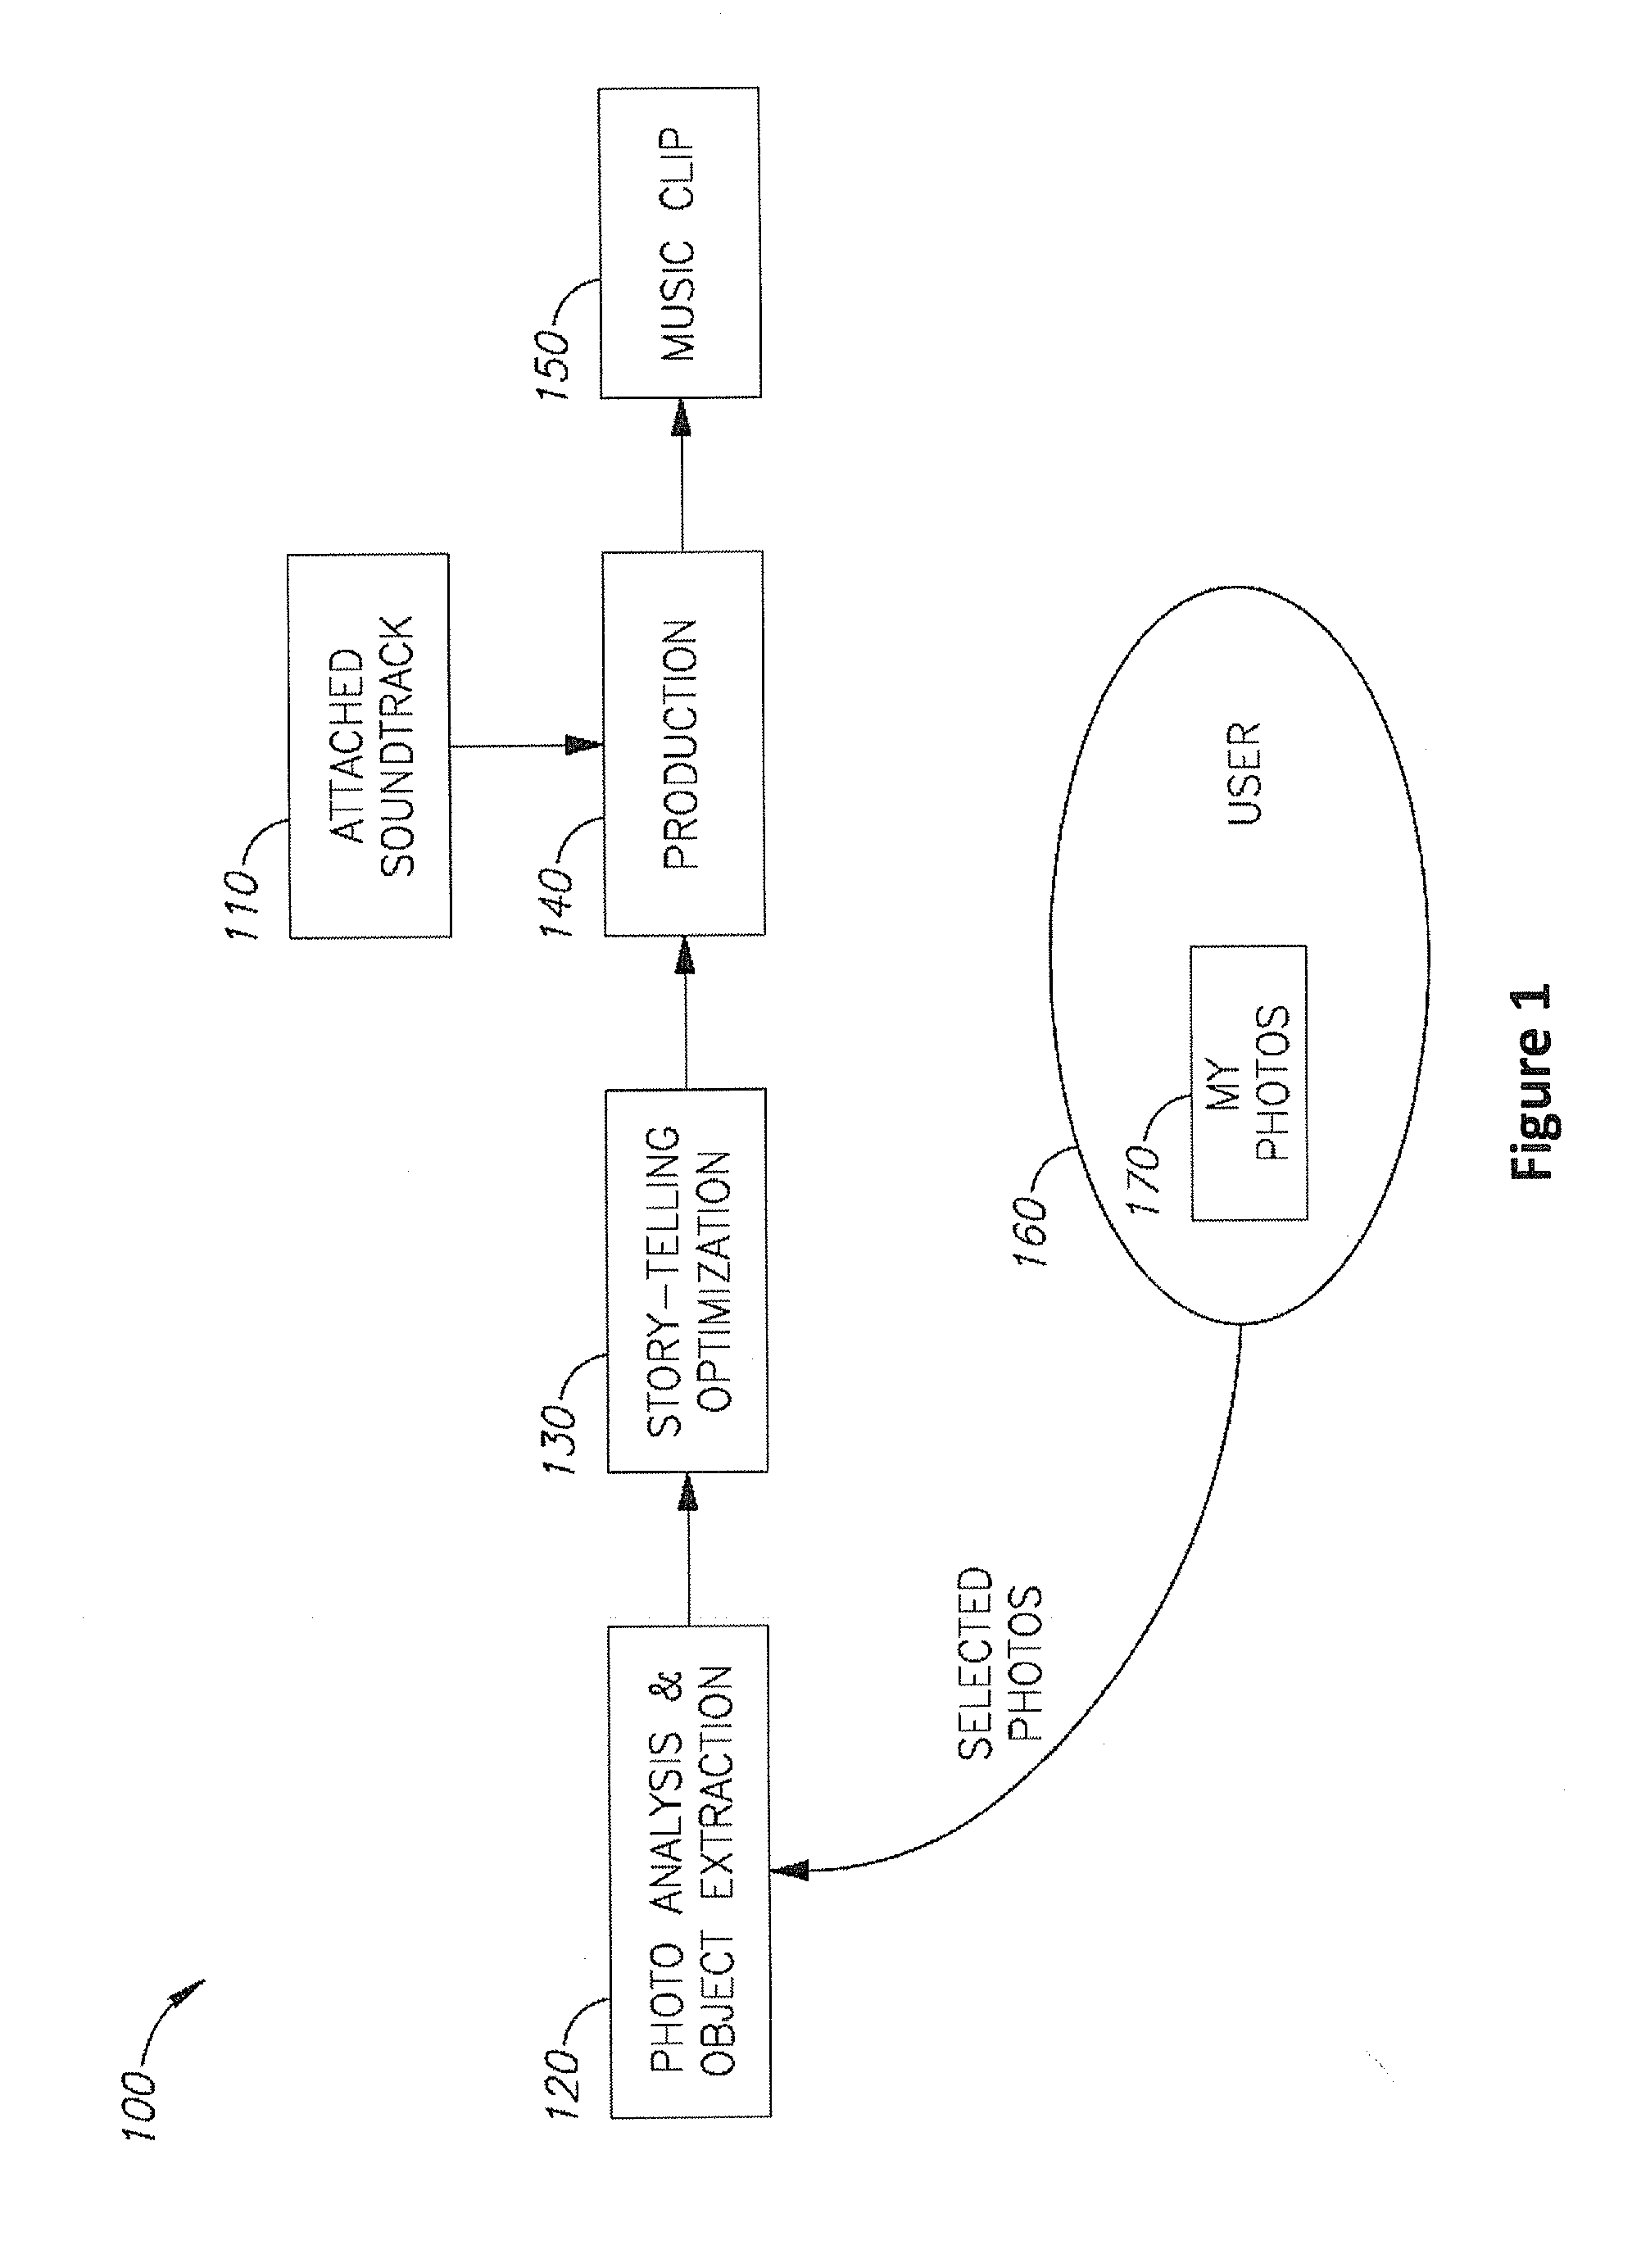 Method and system for automatic generation of an animated message from one or more images